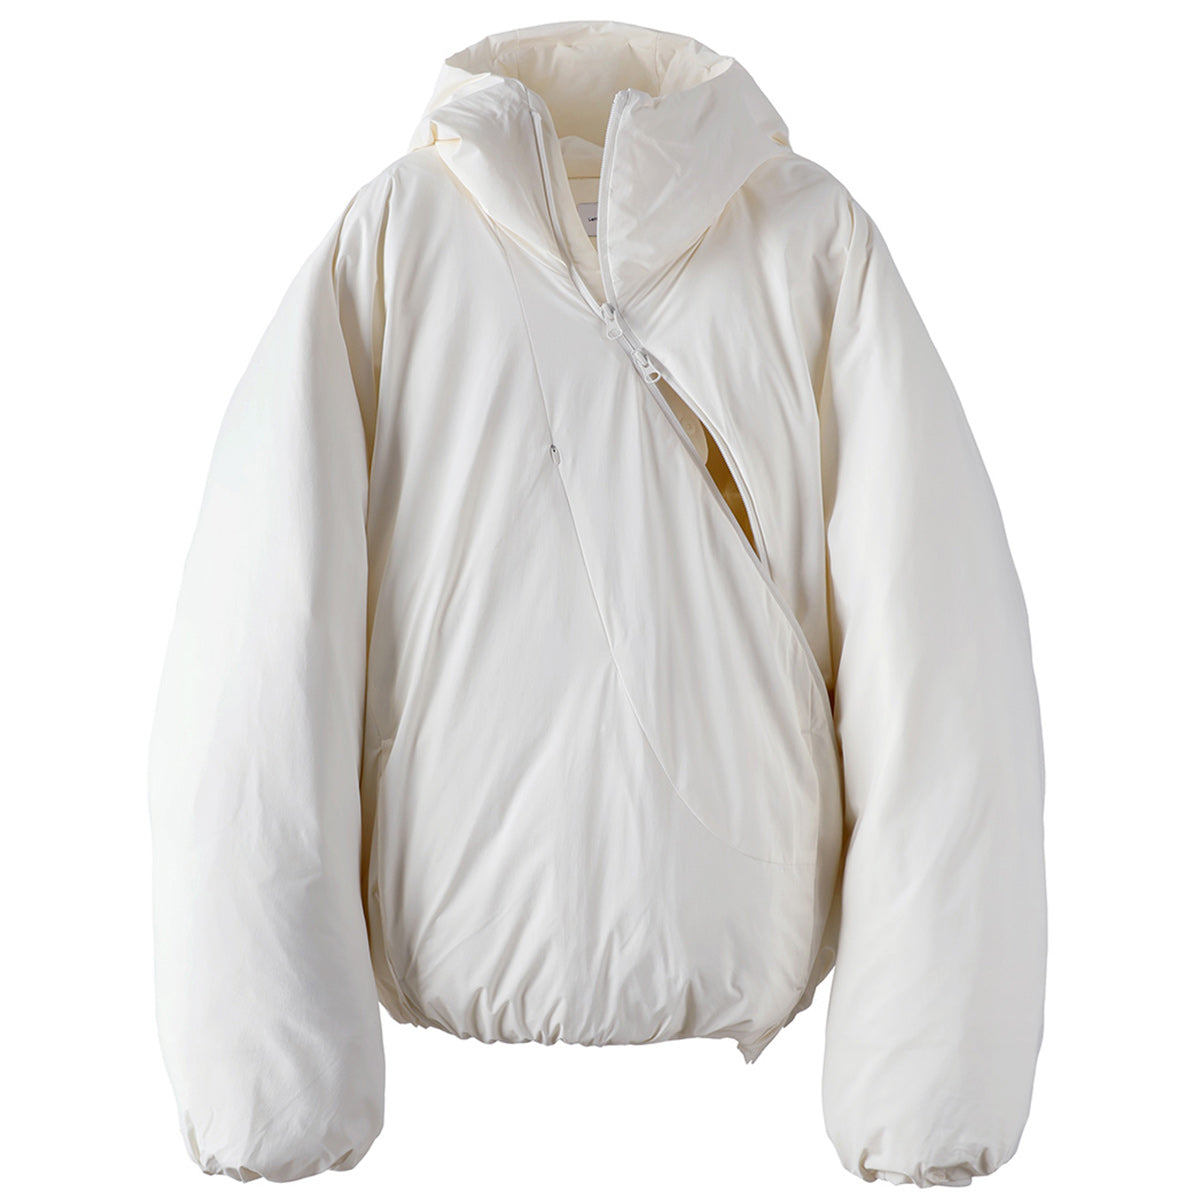 POST ARCHIVE FACTION (PAF) - 5.1 DOWN CENTER WHITE down jacket